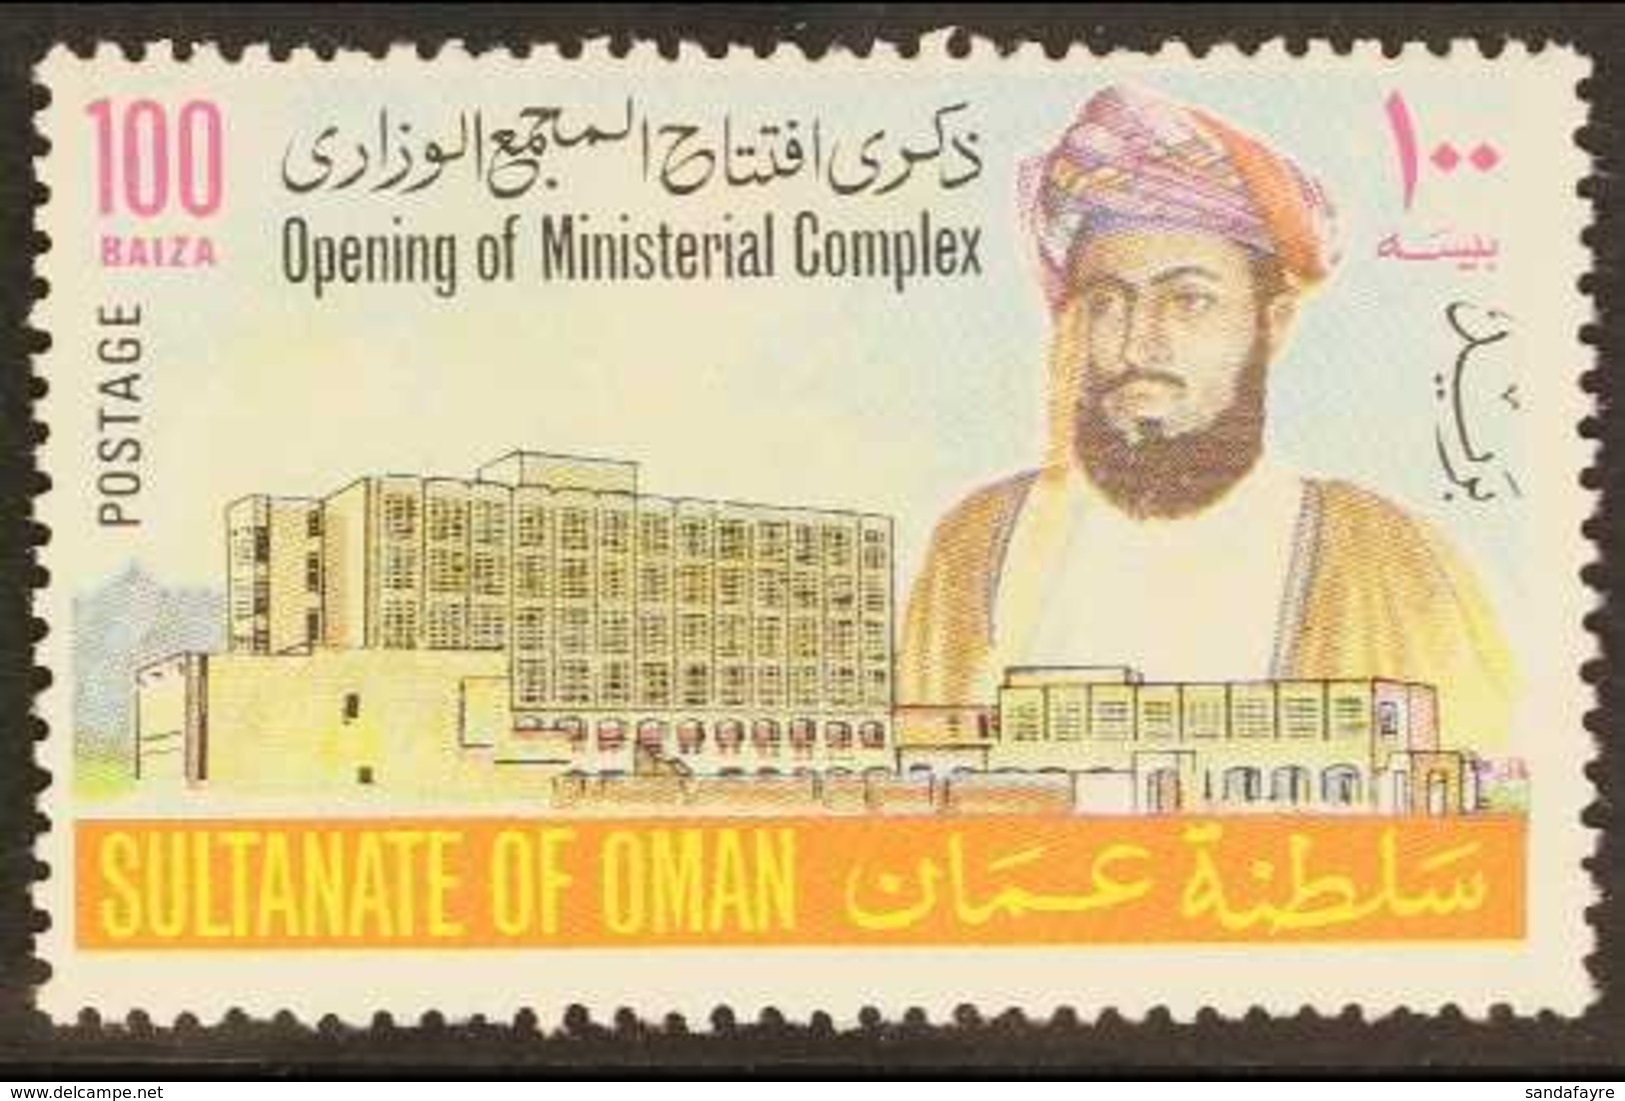 1973 100b Multicoloured Opening Of Ministerial Complex, Variety "Date Omitted", SG 171a, Very Fine Never Hinged Mint. Fo - Oman